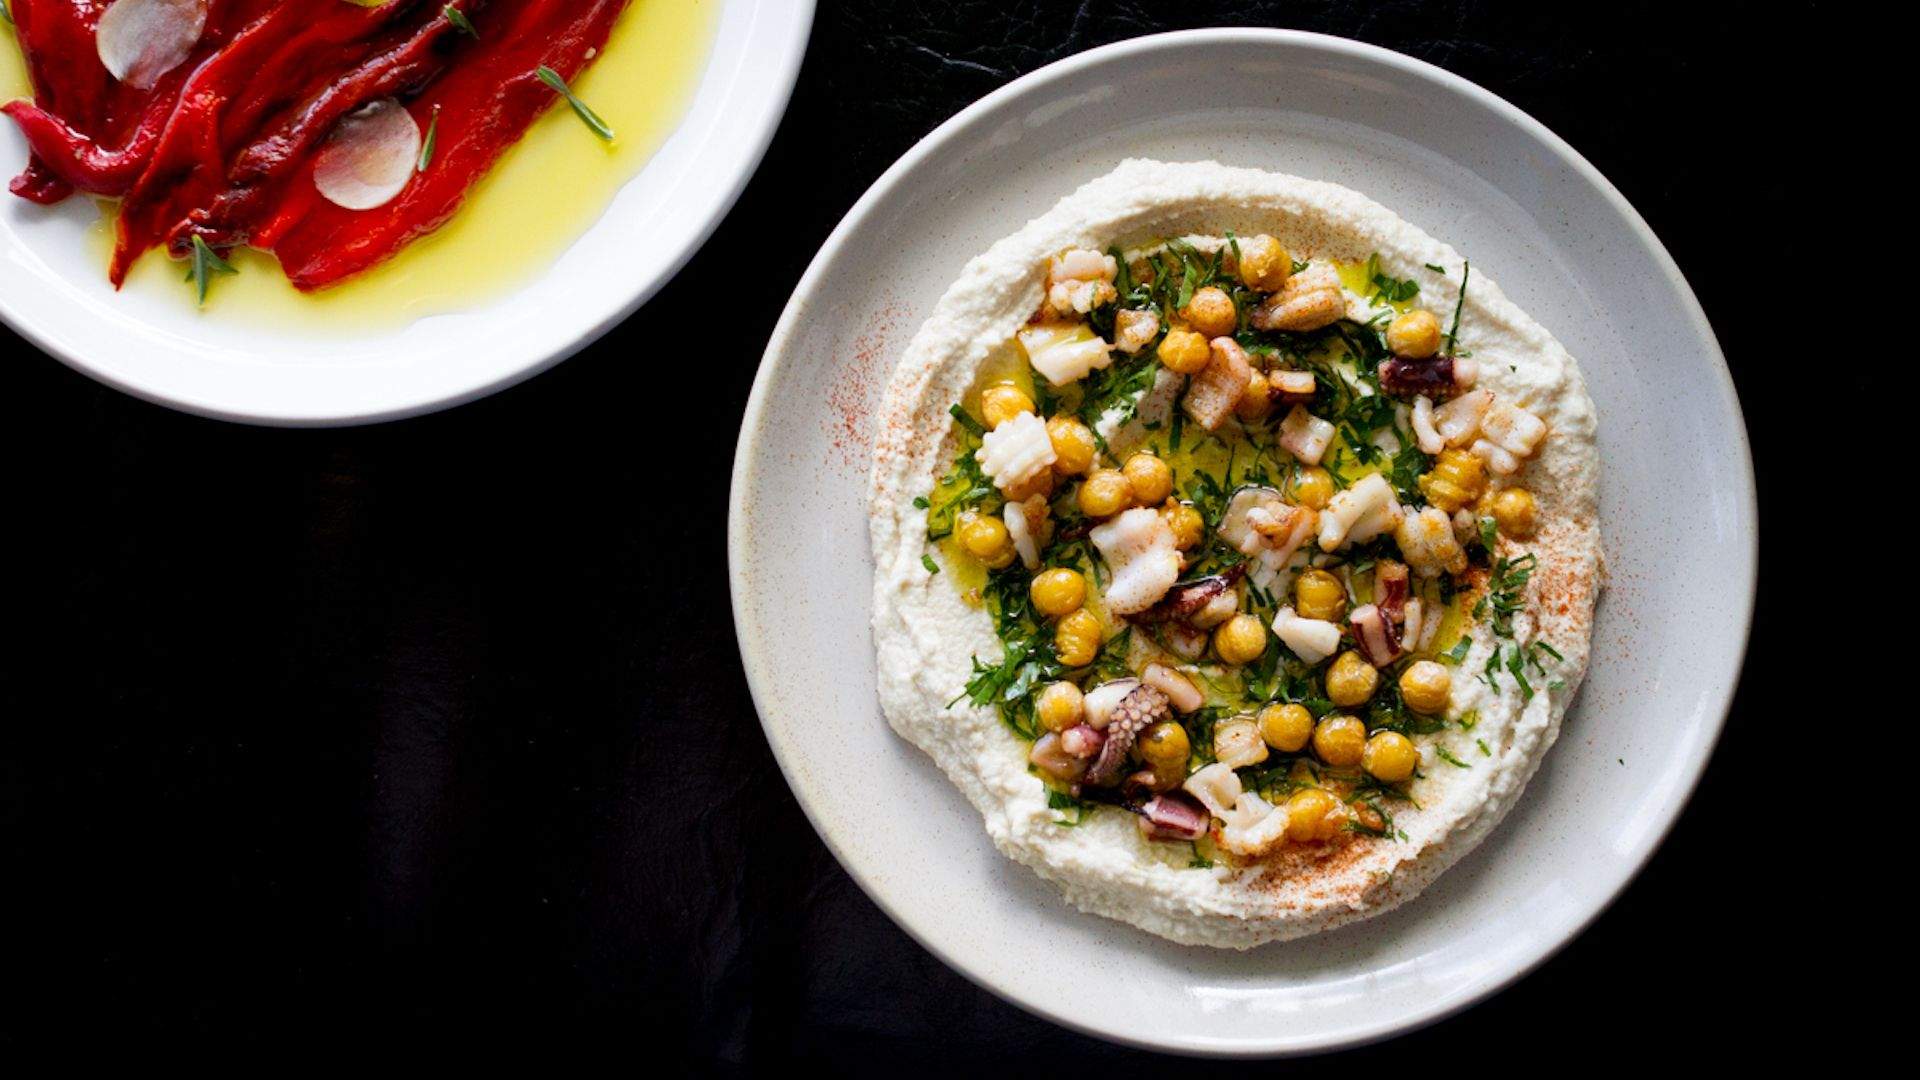 Bar Saracen Is Selling Tubs of Its Signature Hummus to Raise Relief ...